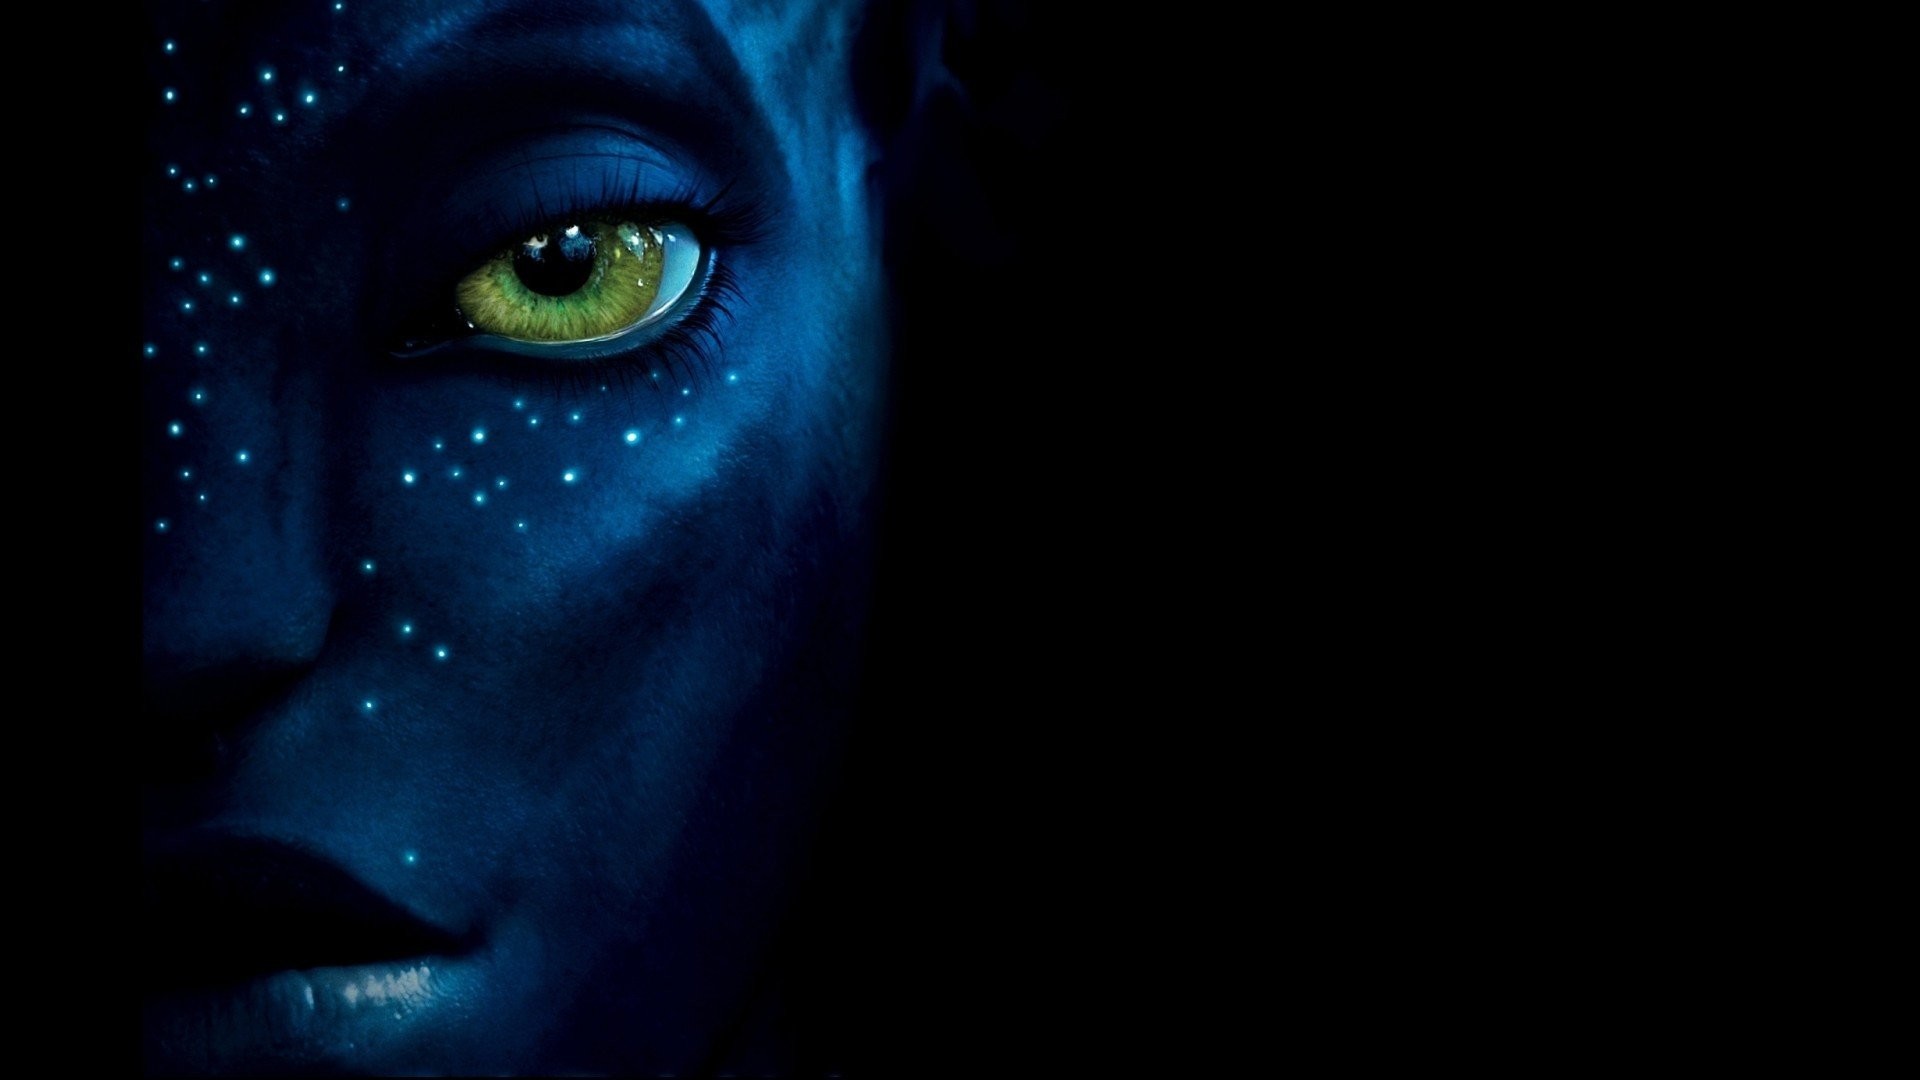 Page 3 of Avatar 4K wallpapers for your desktop or mobile screen